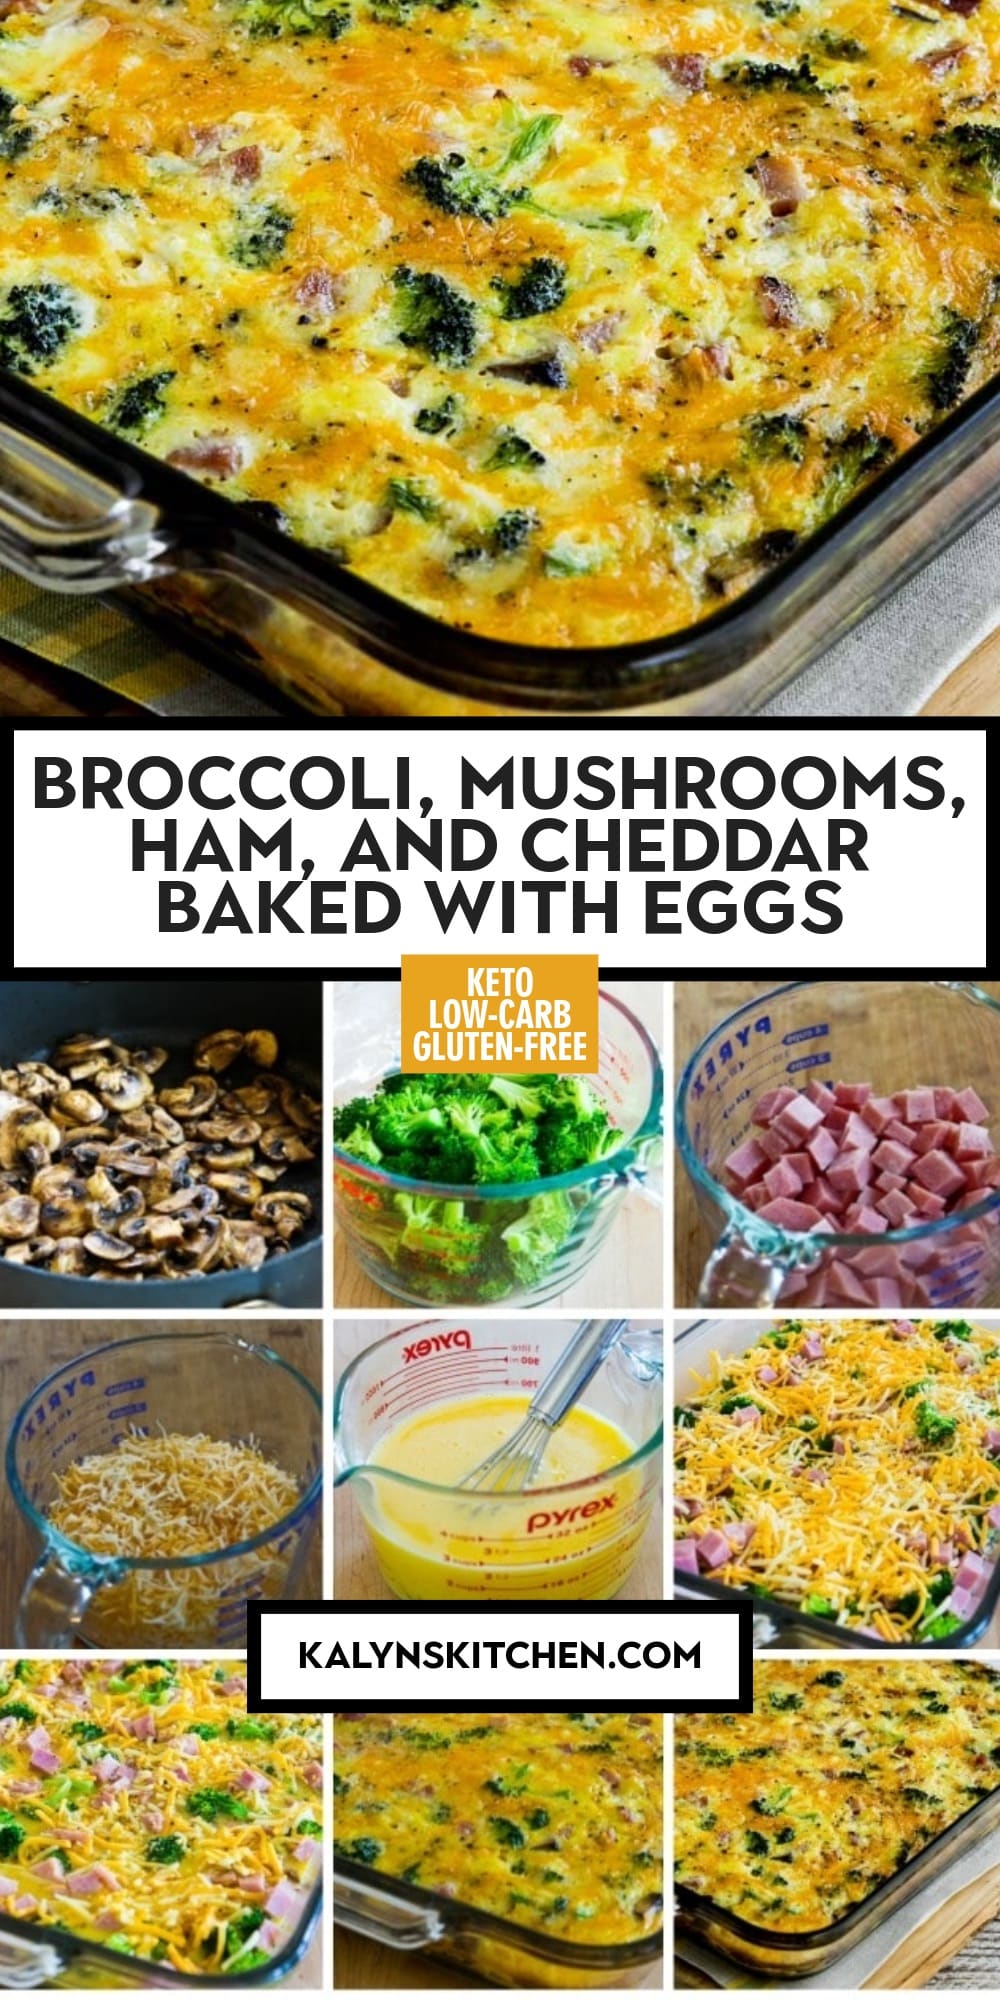 Pinterest image of Broccoli, Mushrooms, Ham, and Cheddar Baked with Eggs